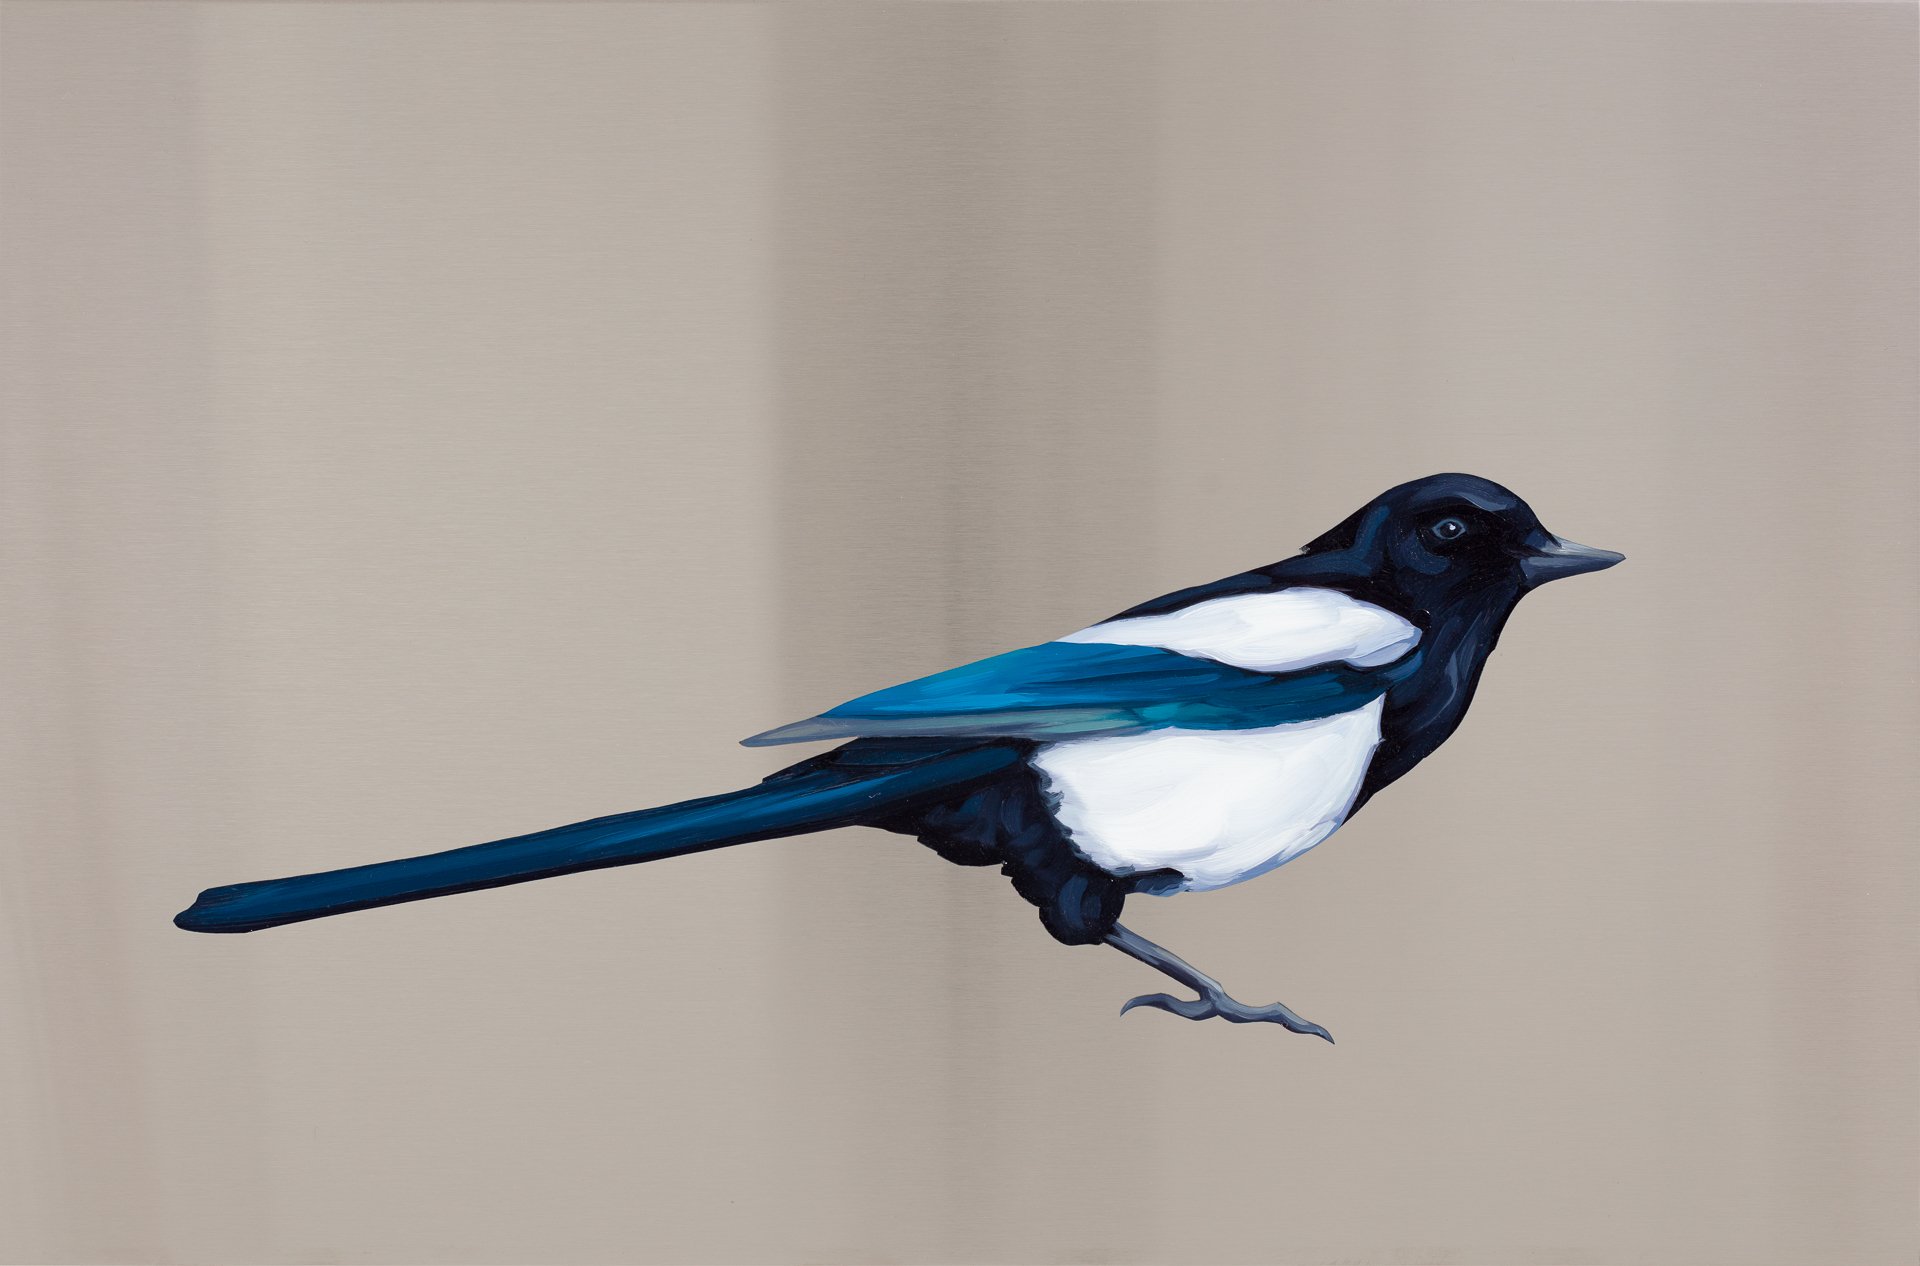  Black Billed Magpie. Oil on stainless steel, 12in x 18in 